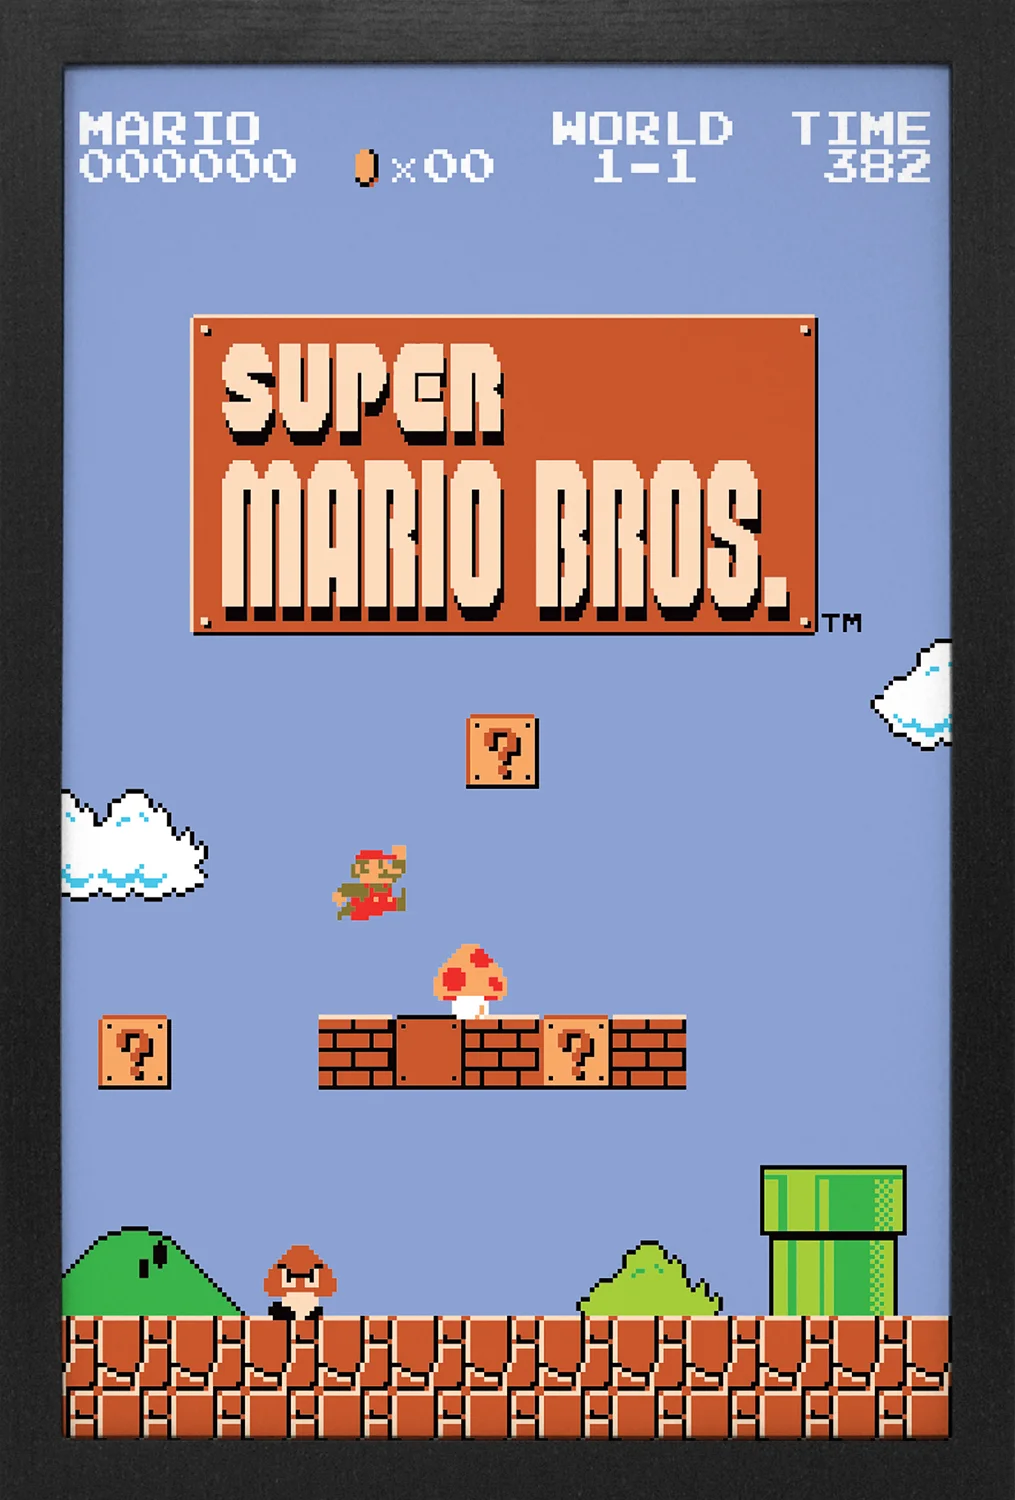 Super Mario Bros - Level 1-1 (11"x17" Gel-Coat) (Pre-Order) (Order in multiples of 6, mix and match styles)